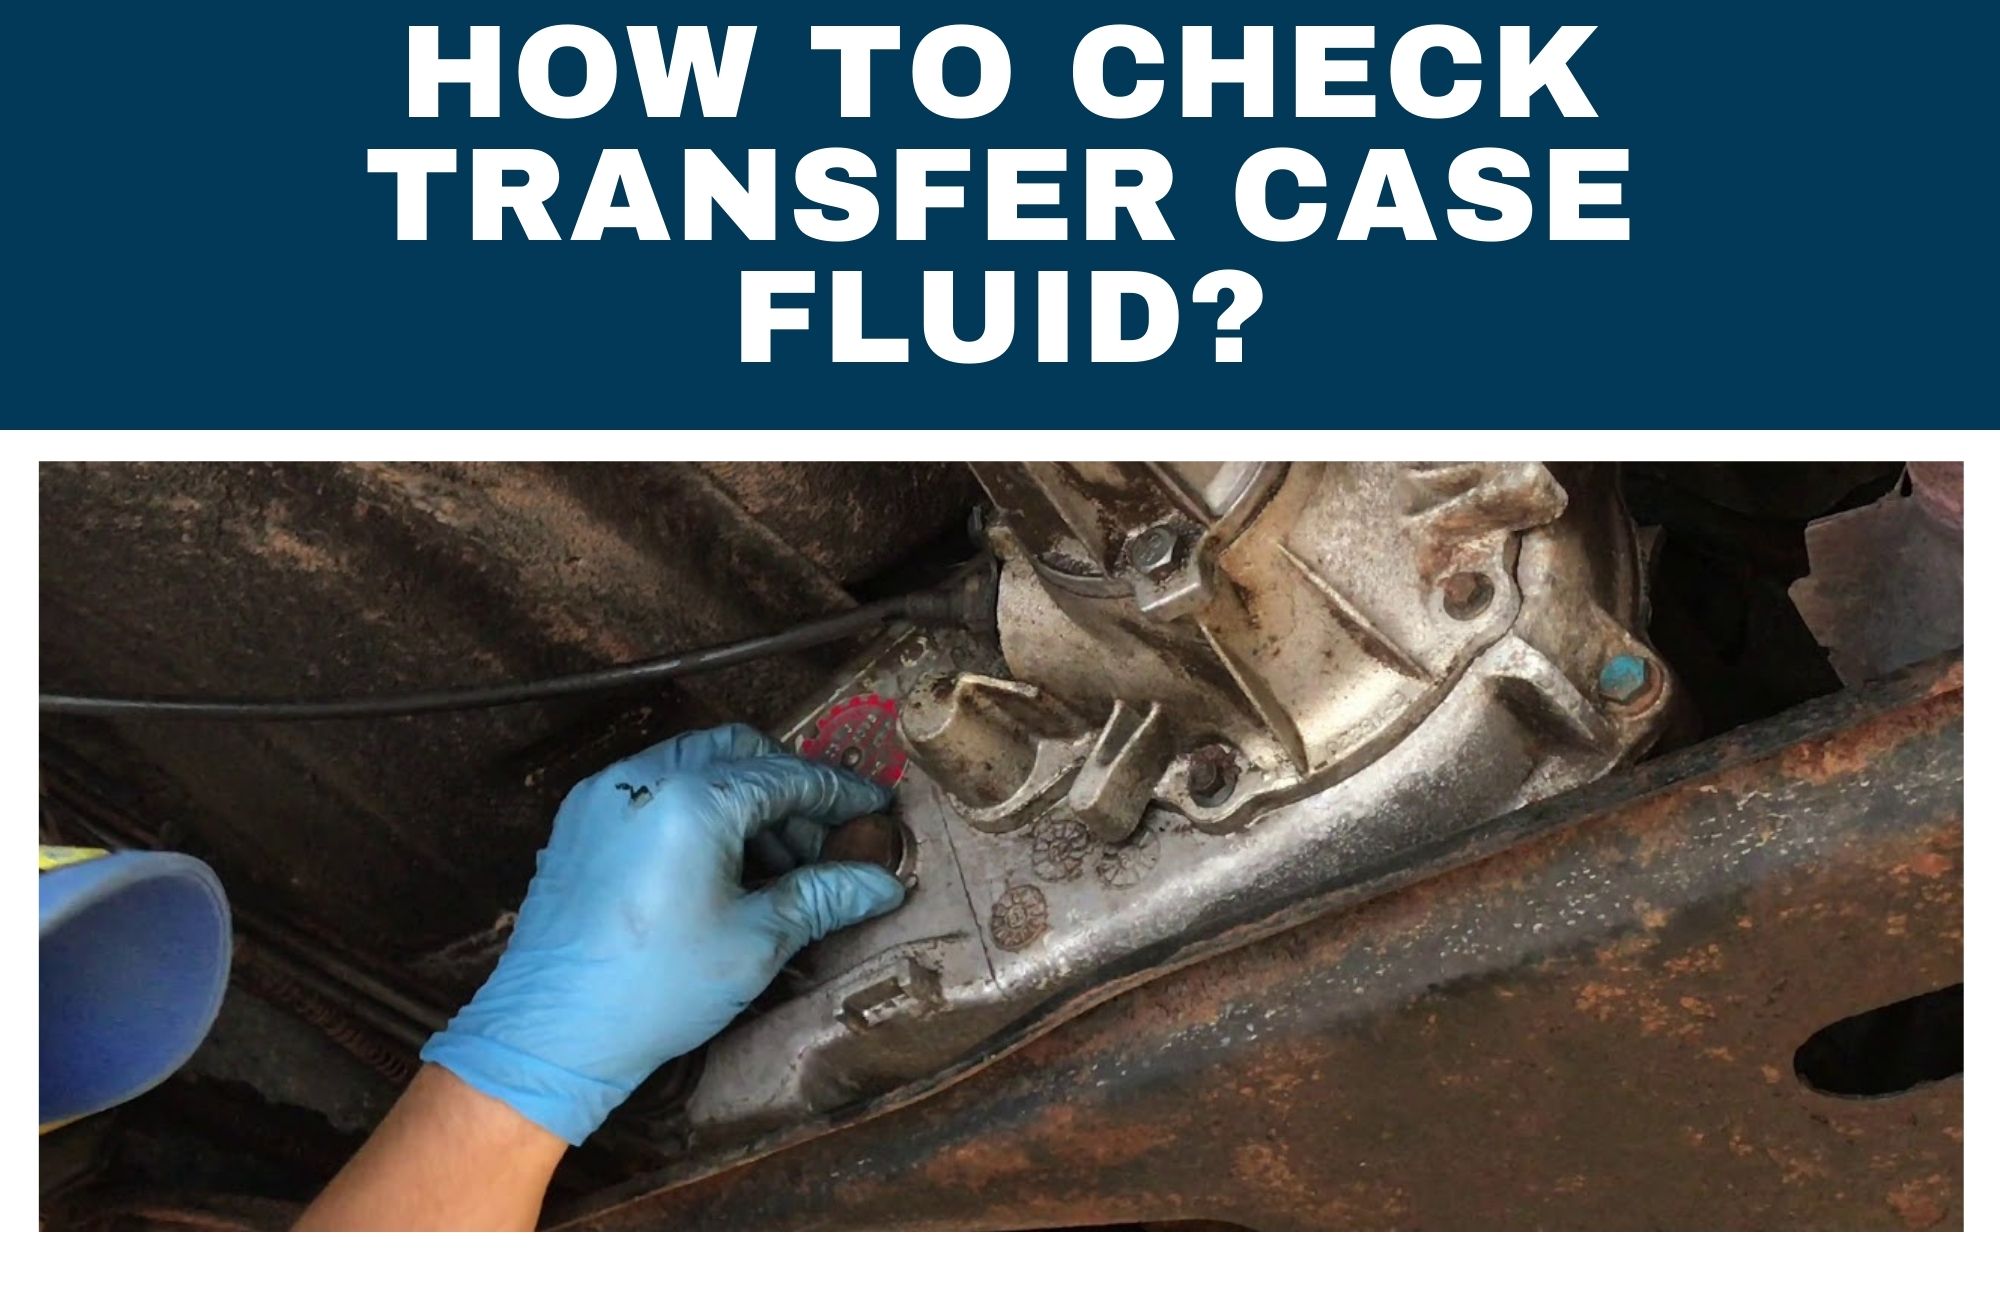 How To Check Transfer Case Fluid?